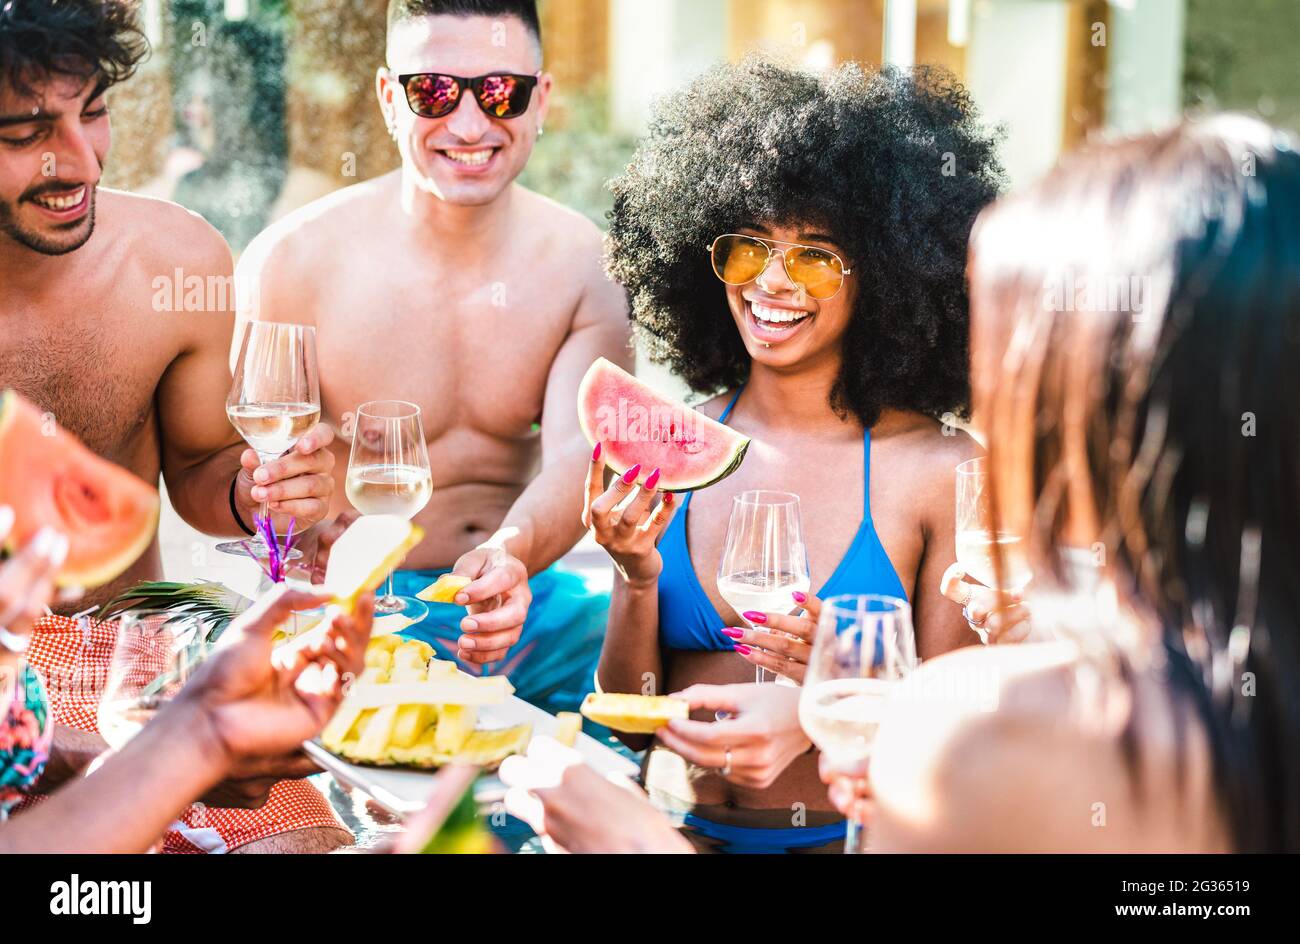 Happy friends group drinking white wine champagne at pool side party - Life style vacation concept with young guys and girls having fun together Stock Photo